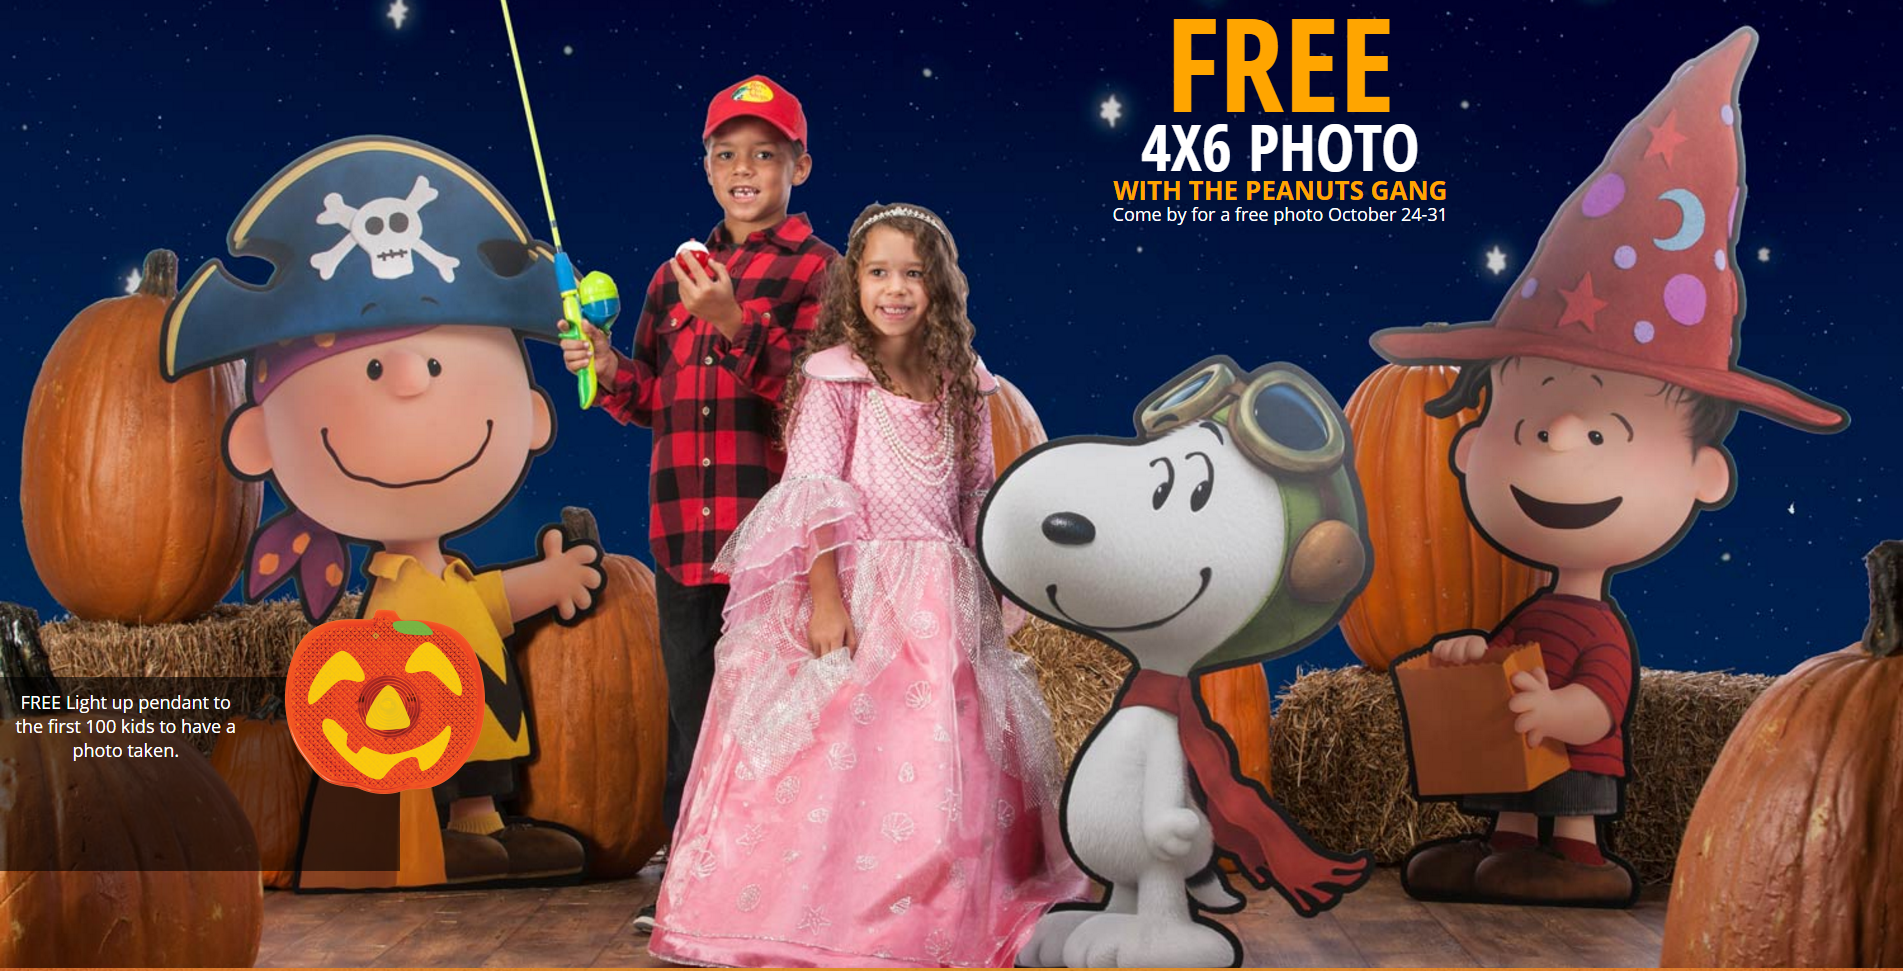 Free 4X6 Halloween Photo with the PEANUTS Gang at Bass Pro Shops #PeanutsMovie 2